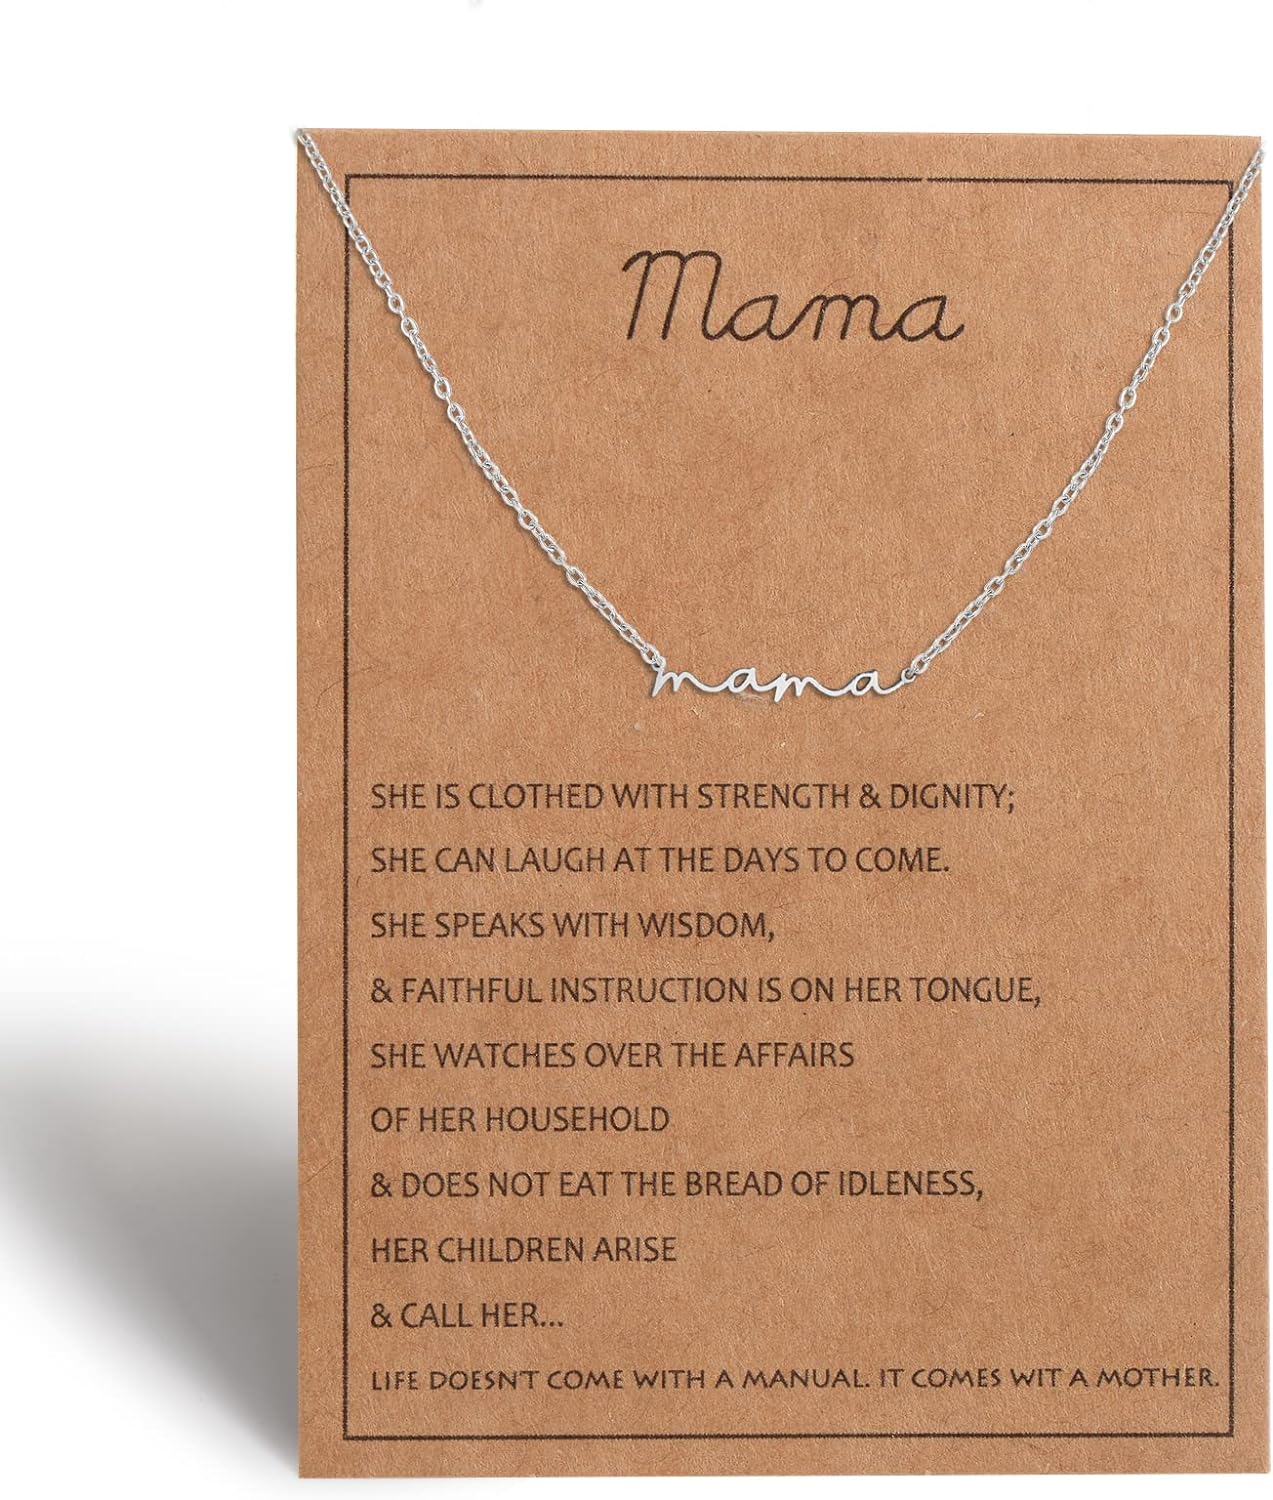 Mama necklace for Women - Silver, Gold & Rose Gold Mom Jewelry for Women, Gifts for New Mom, Expecting Mom Gift for Pregnant Friend, Mom to be Gifts with Cards